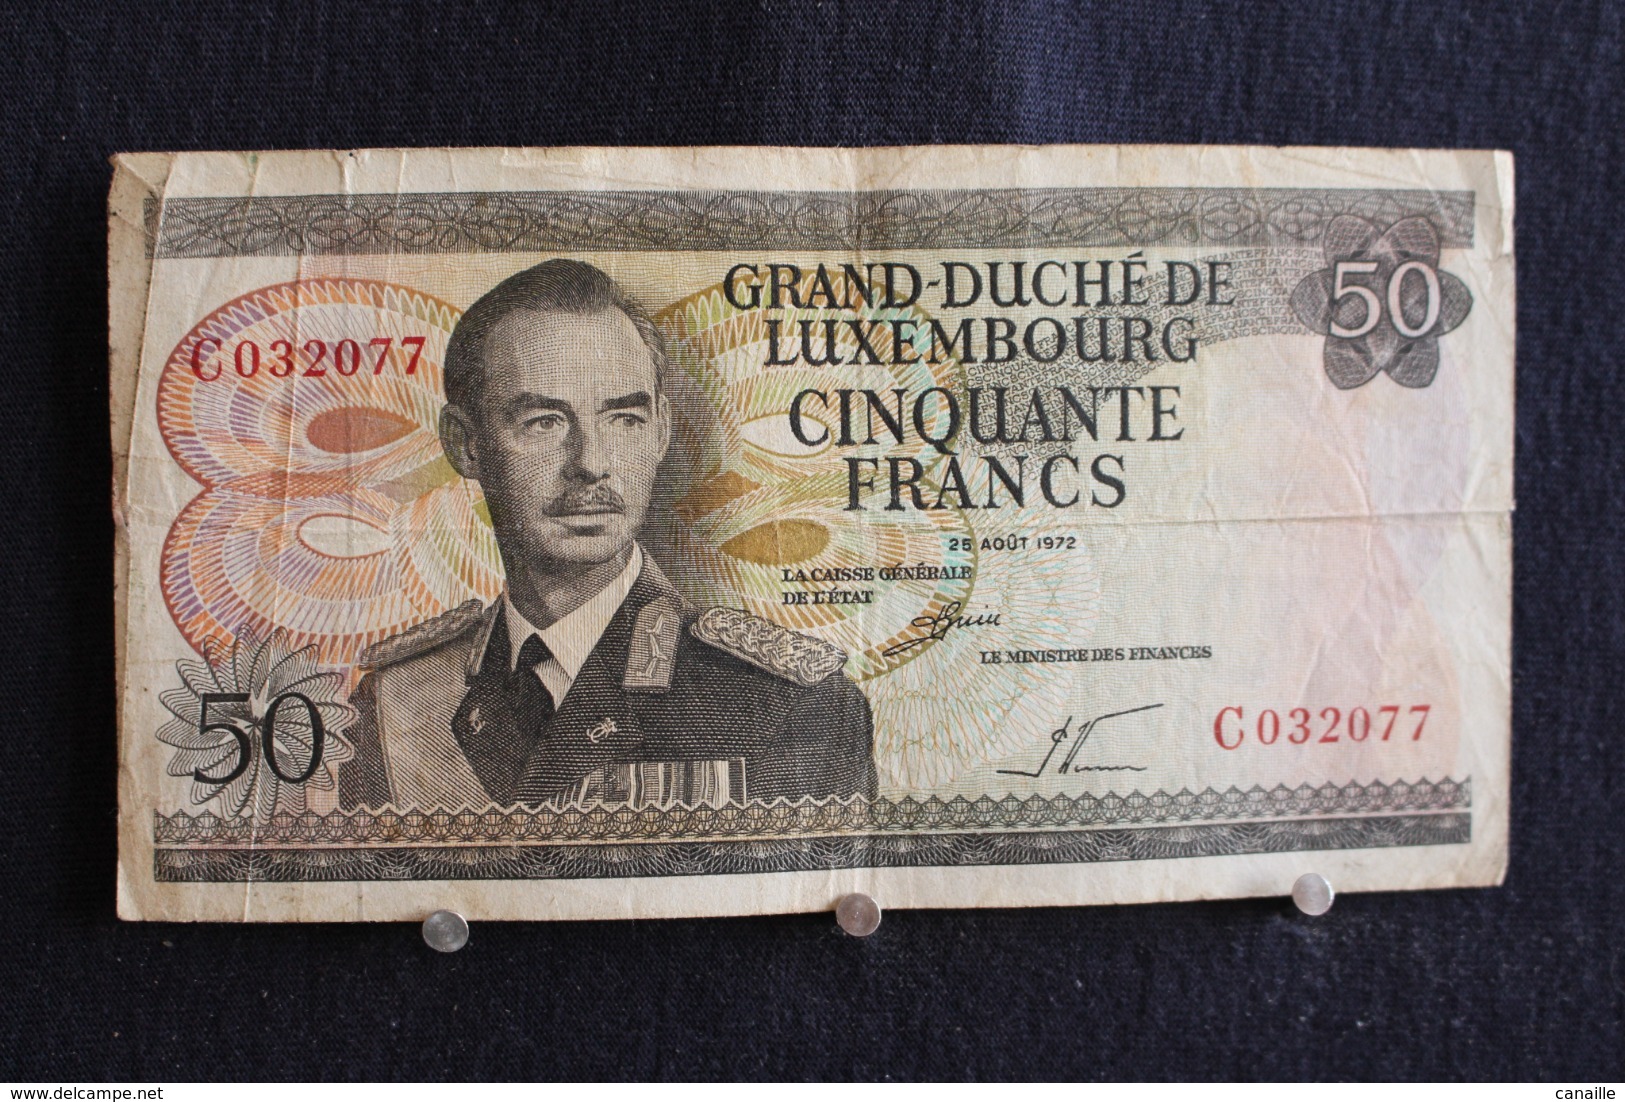 88 /  Grand-Duché De Luxembourg , Luxembourg  50 Francs - 1972 /  N° C 032077 - Luxembourg